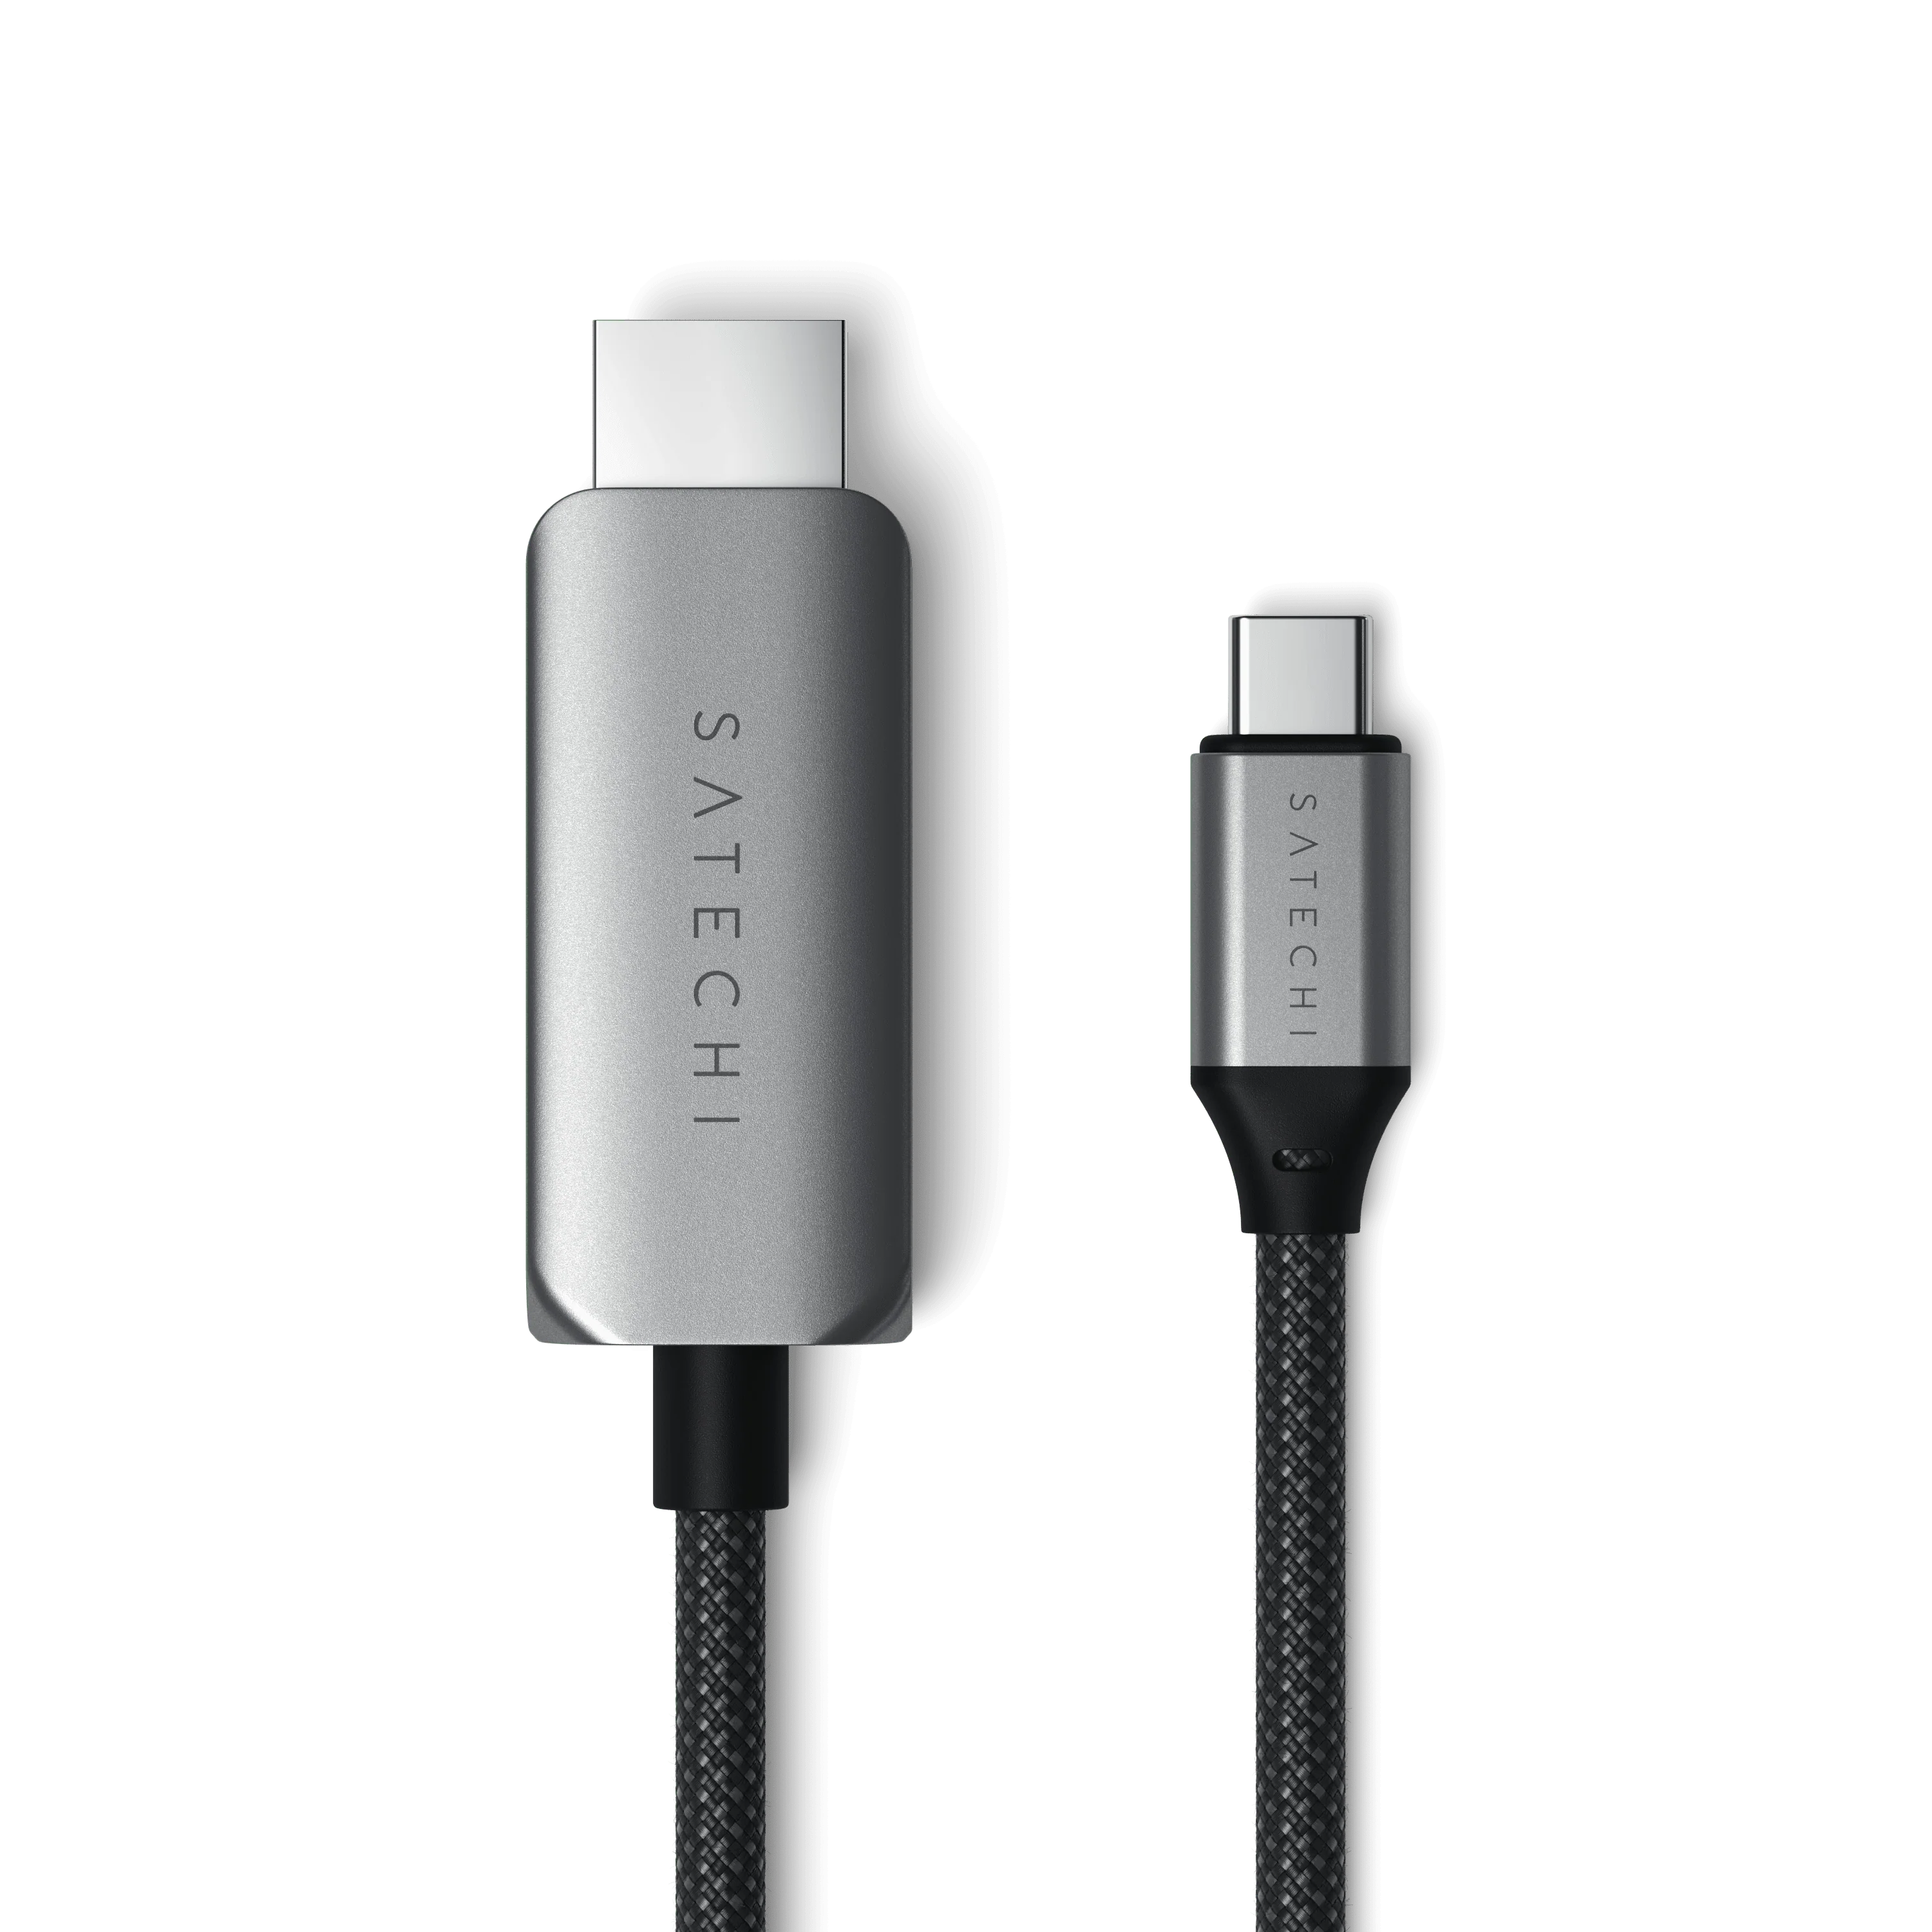 Кабель Satechi USB-C To HDMI 2.1 8K Cable (ST-YH8KCM)